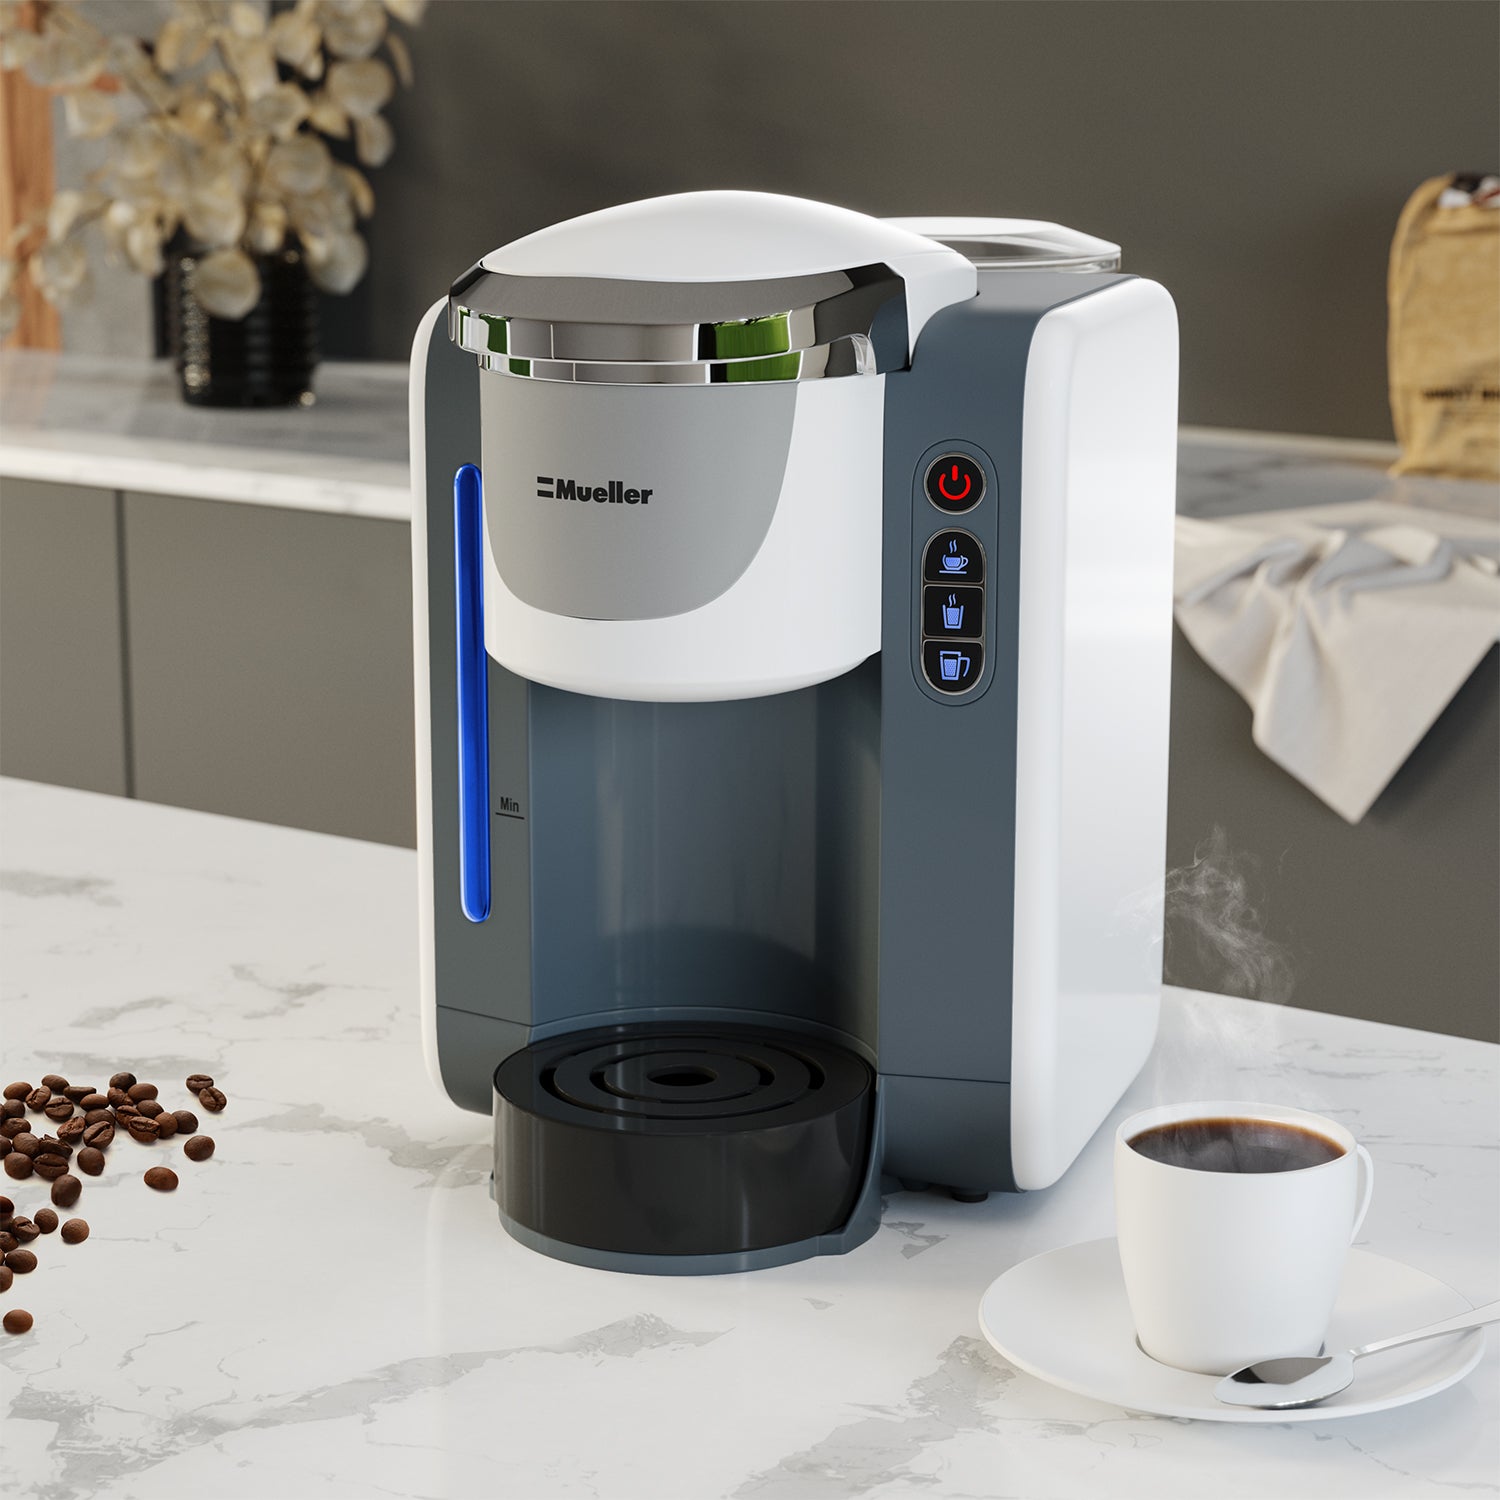 Mixpresso 2 in 1 Coffee Brewer, Single Serve and K Cup Compatible